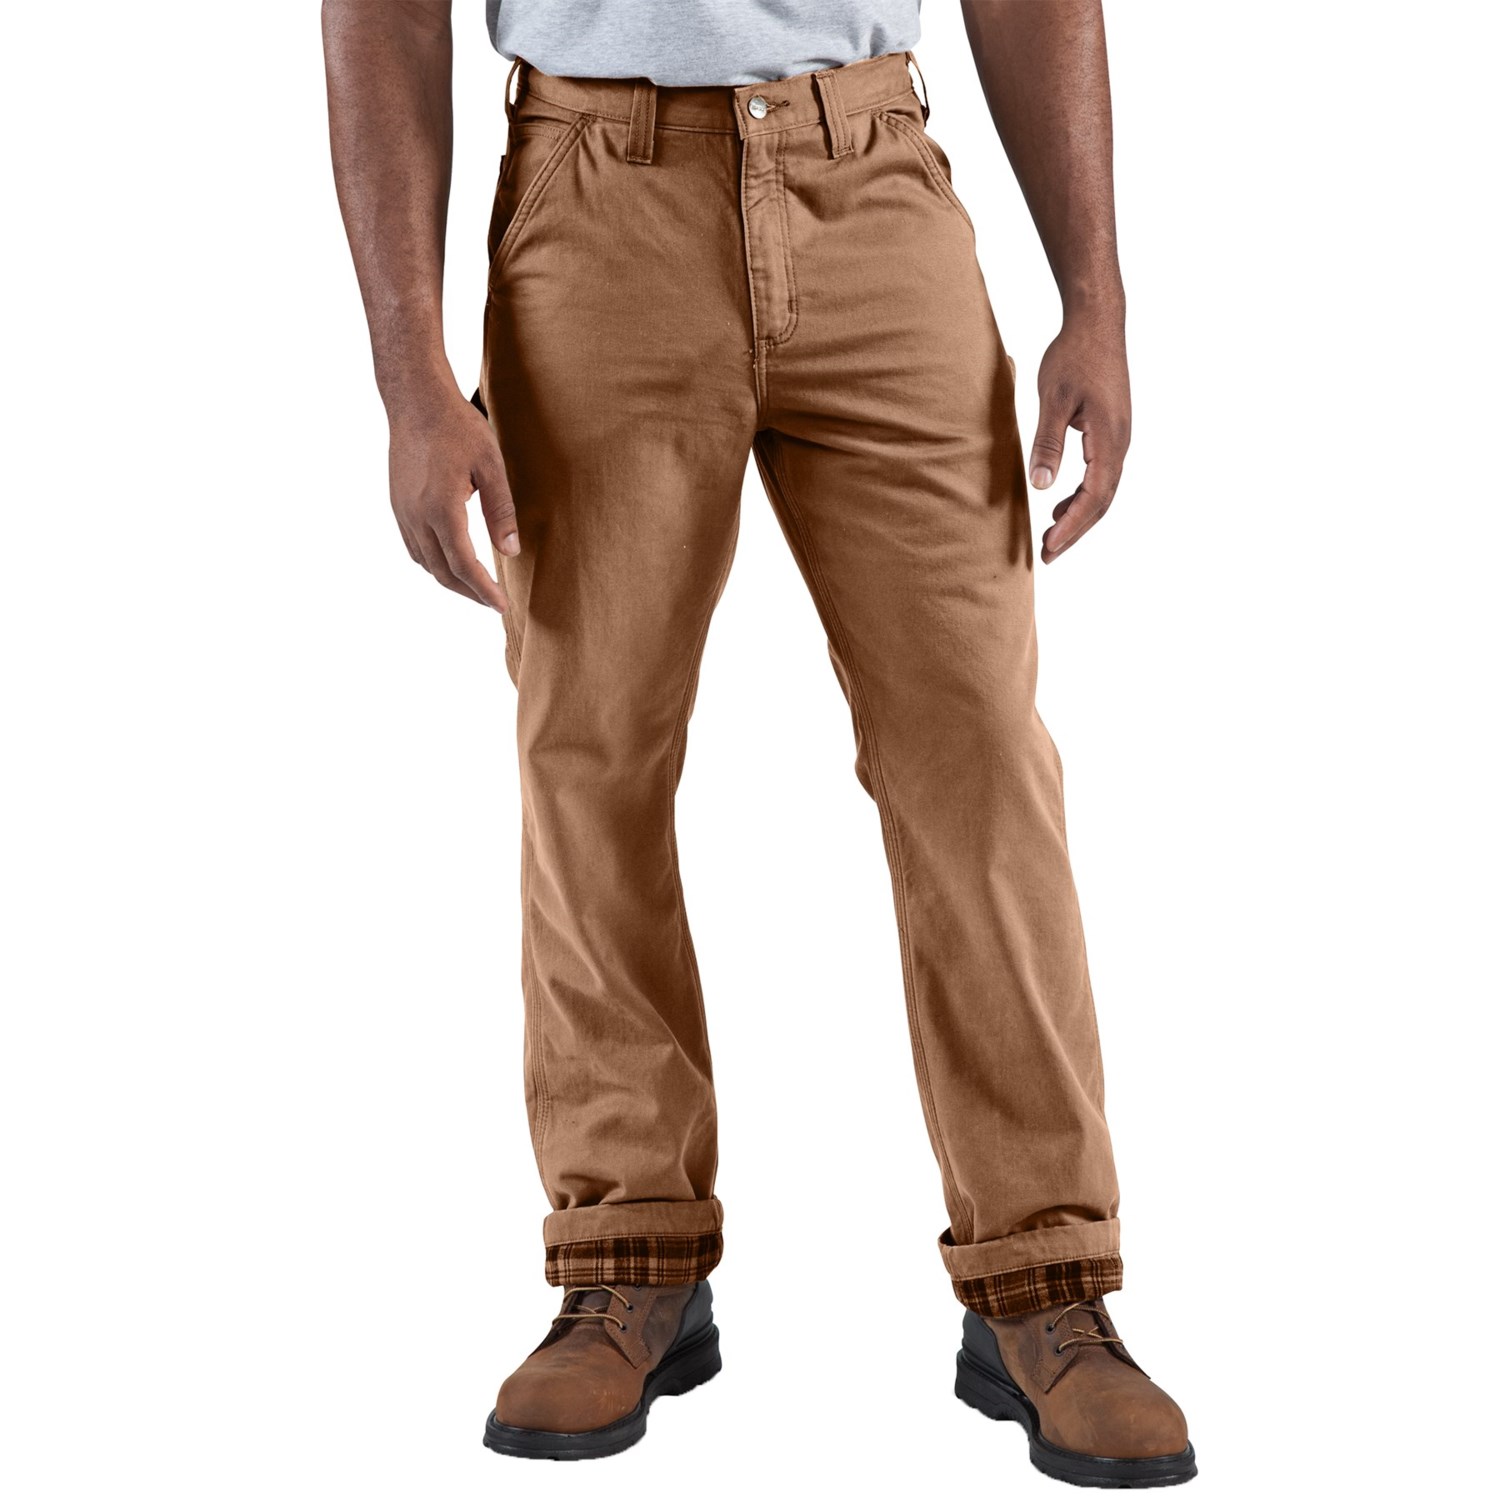 Carhartt Flannel-Lined Dungaree Pants (For Men)